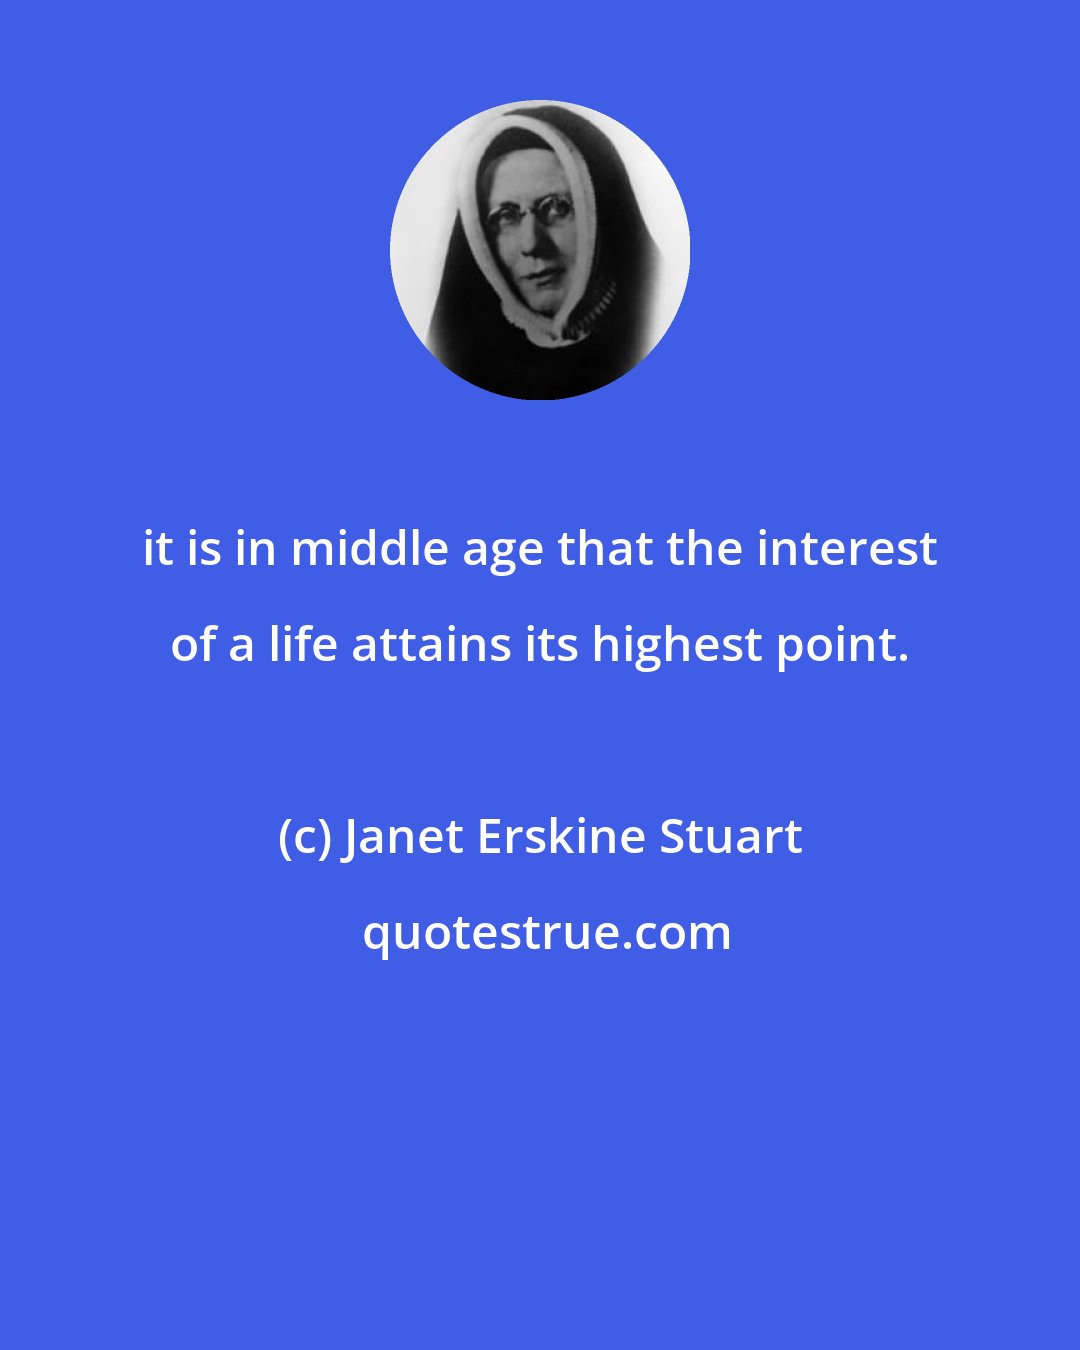 Janet Erskine Stuart: it is in middle age that the interest of a life attains its highest point.